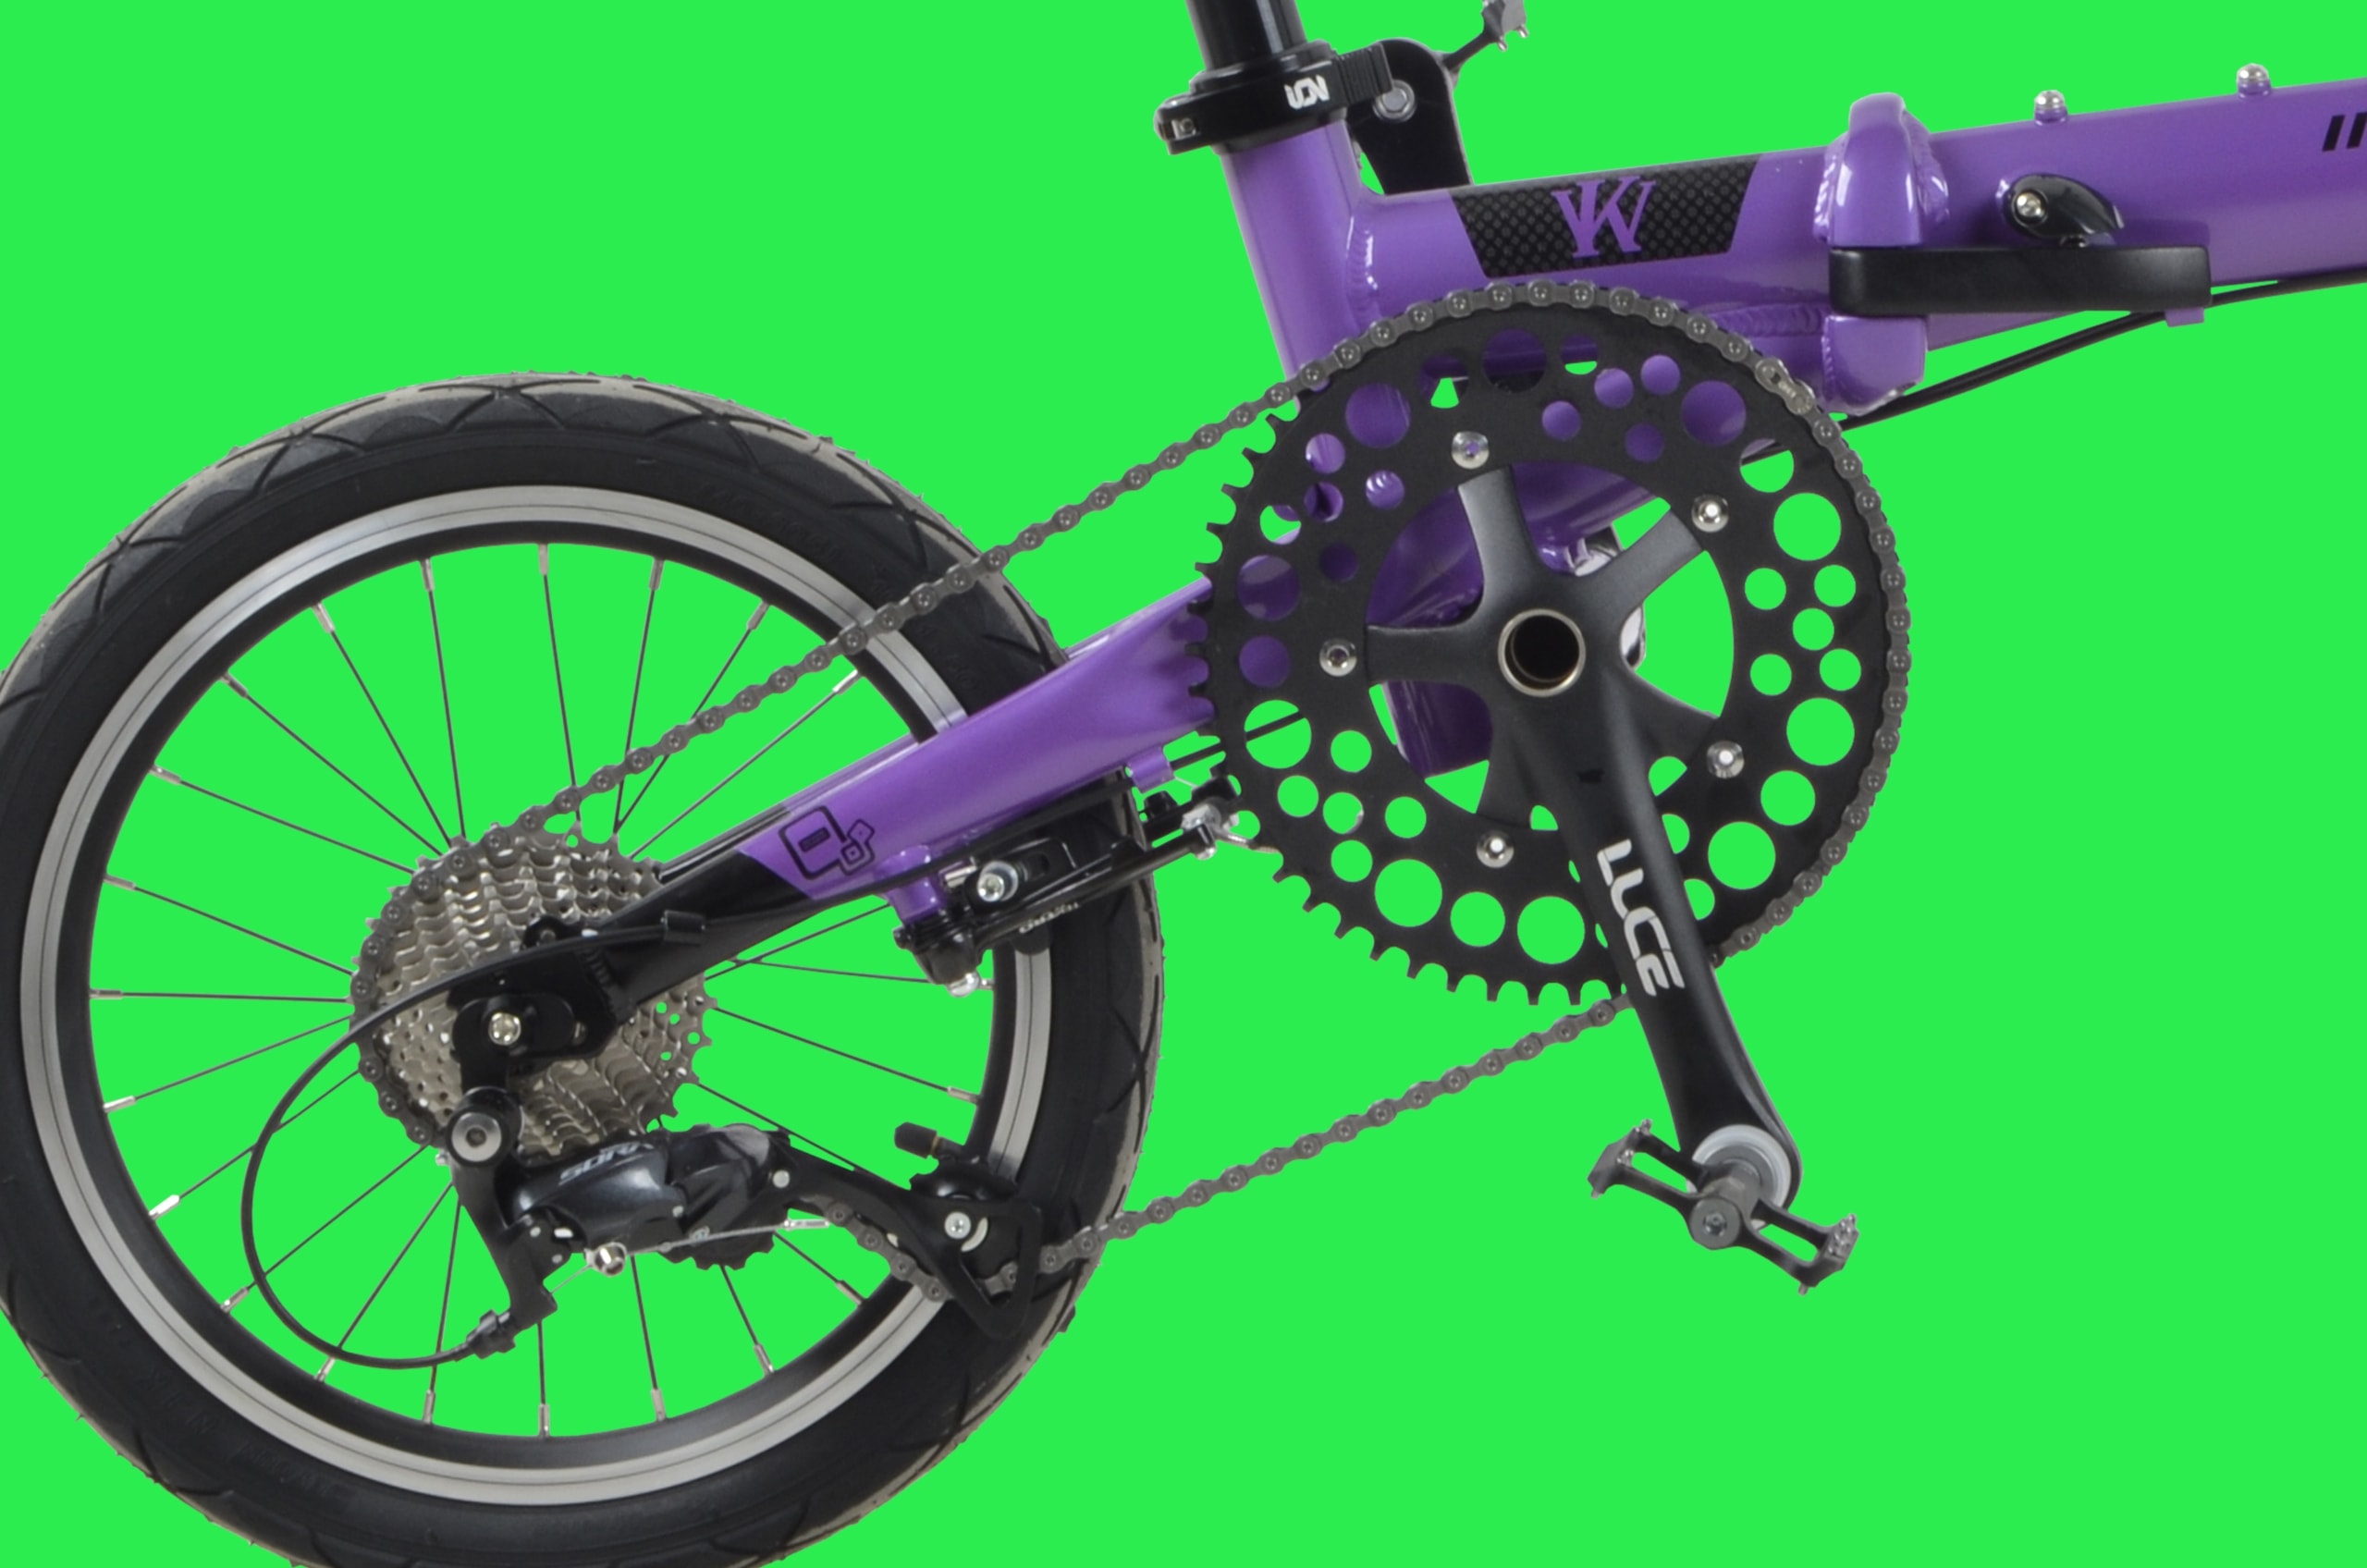 CAMP LITE PURPLE foldable bicycle left zoom in scaled - Bicycle Groupset Hierarchy - Shimano, SRAM, SENSAH Groupset